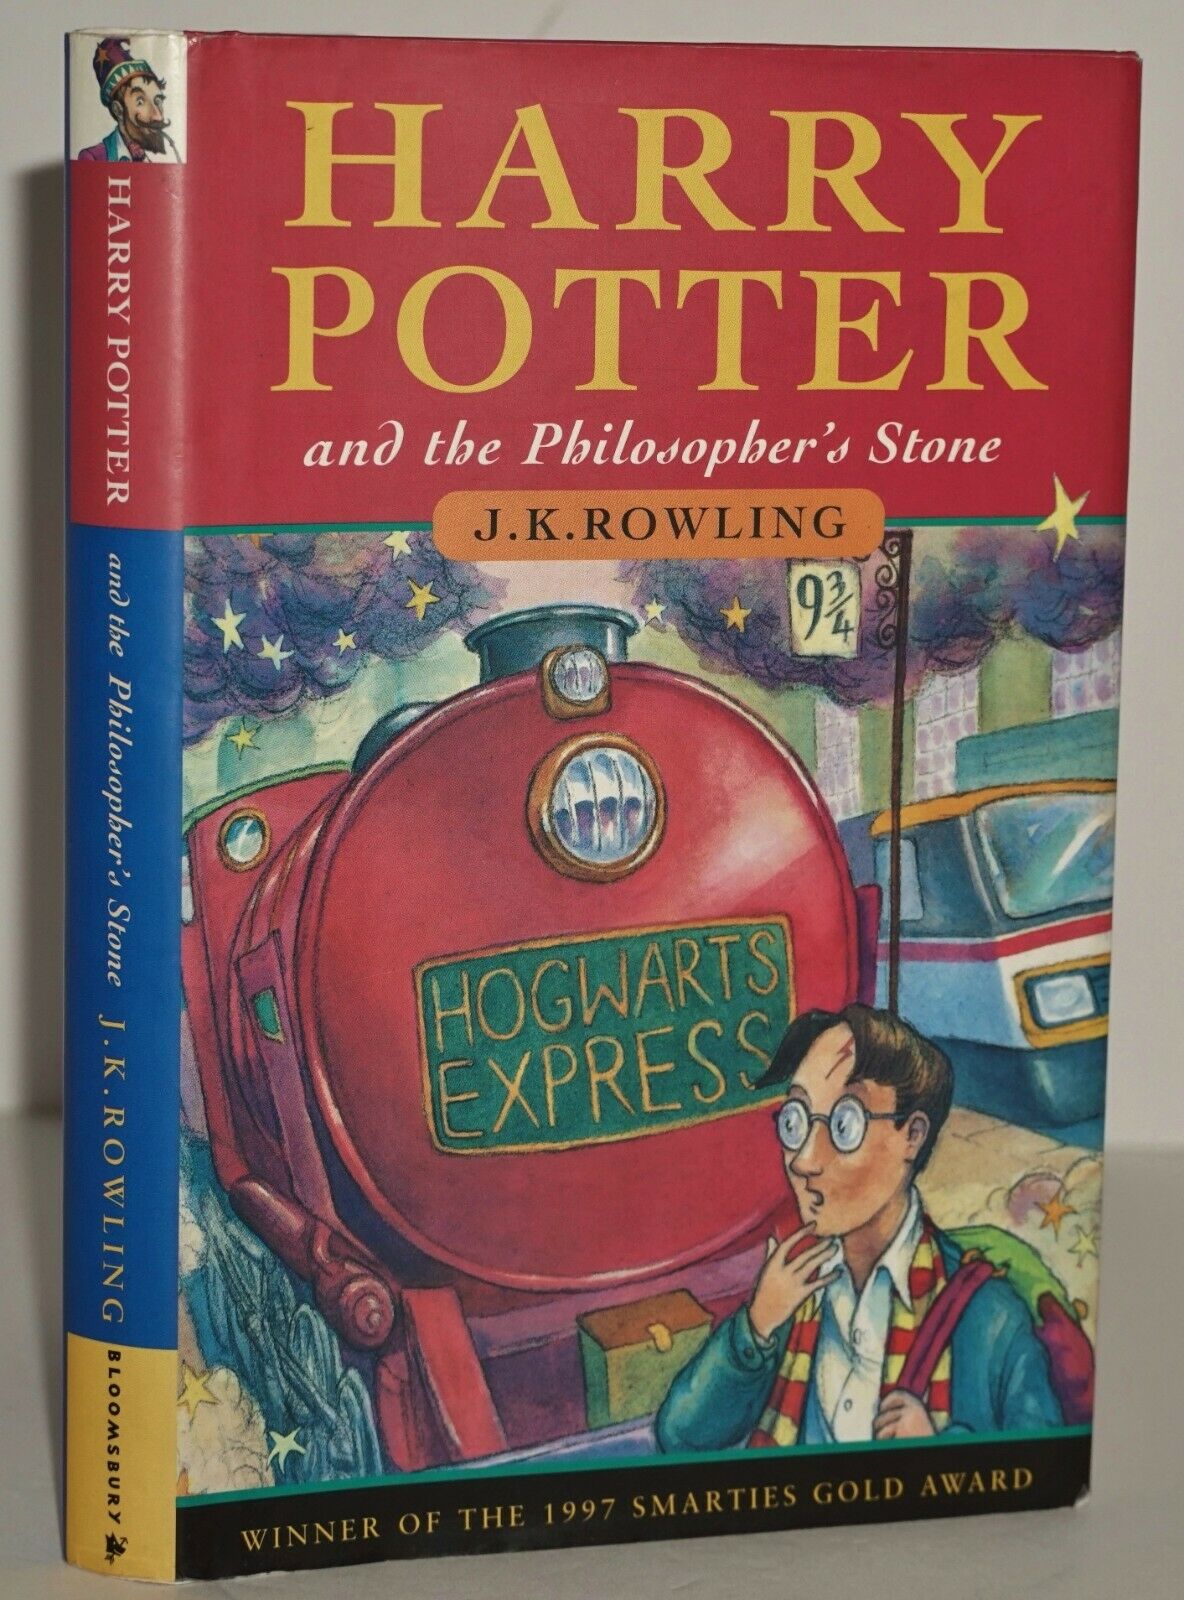 Concesión Acostumbrarse a Enjuague bucal HARRY POTTER AND THE PHILOSOPHER'S STONE (4th BLOOMSBURY PRINTING) de J.K.  ROWLING: Near Fine Hardcover (1997) 1st Edition | Meier And Sons Rare Books